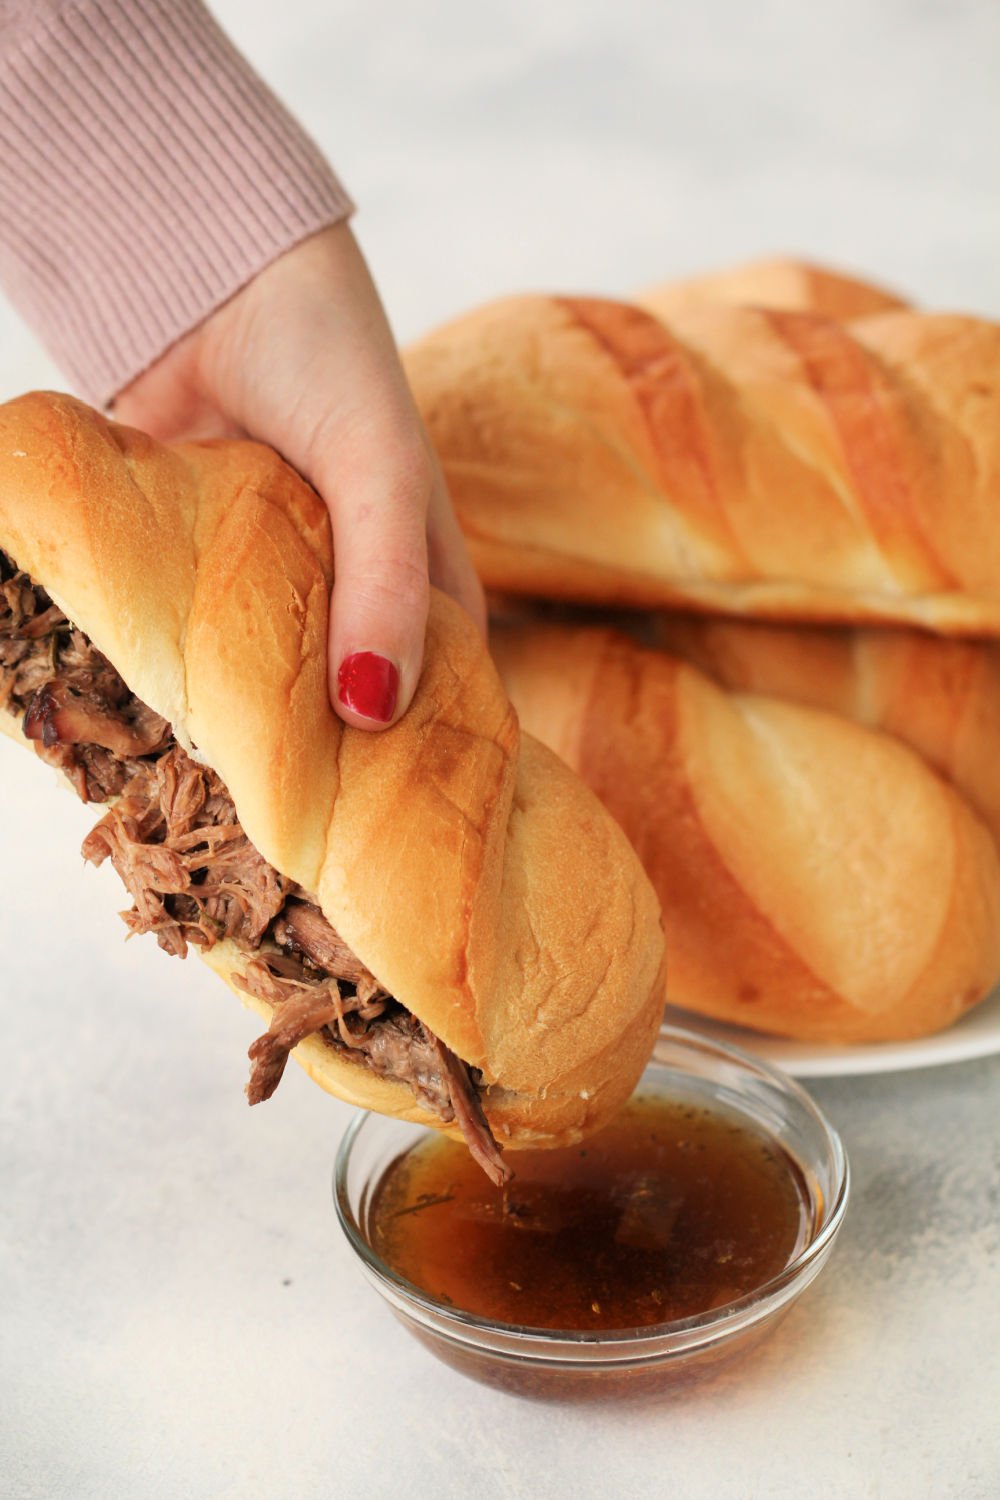 Dipping Instant Pot French Dip Sandwiches in AuJu sauce